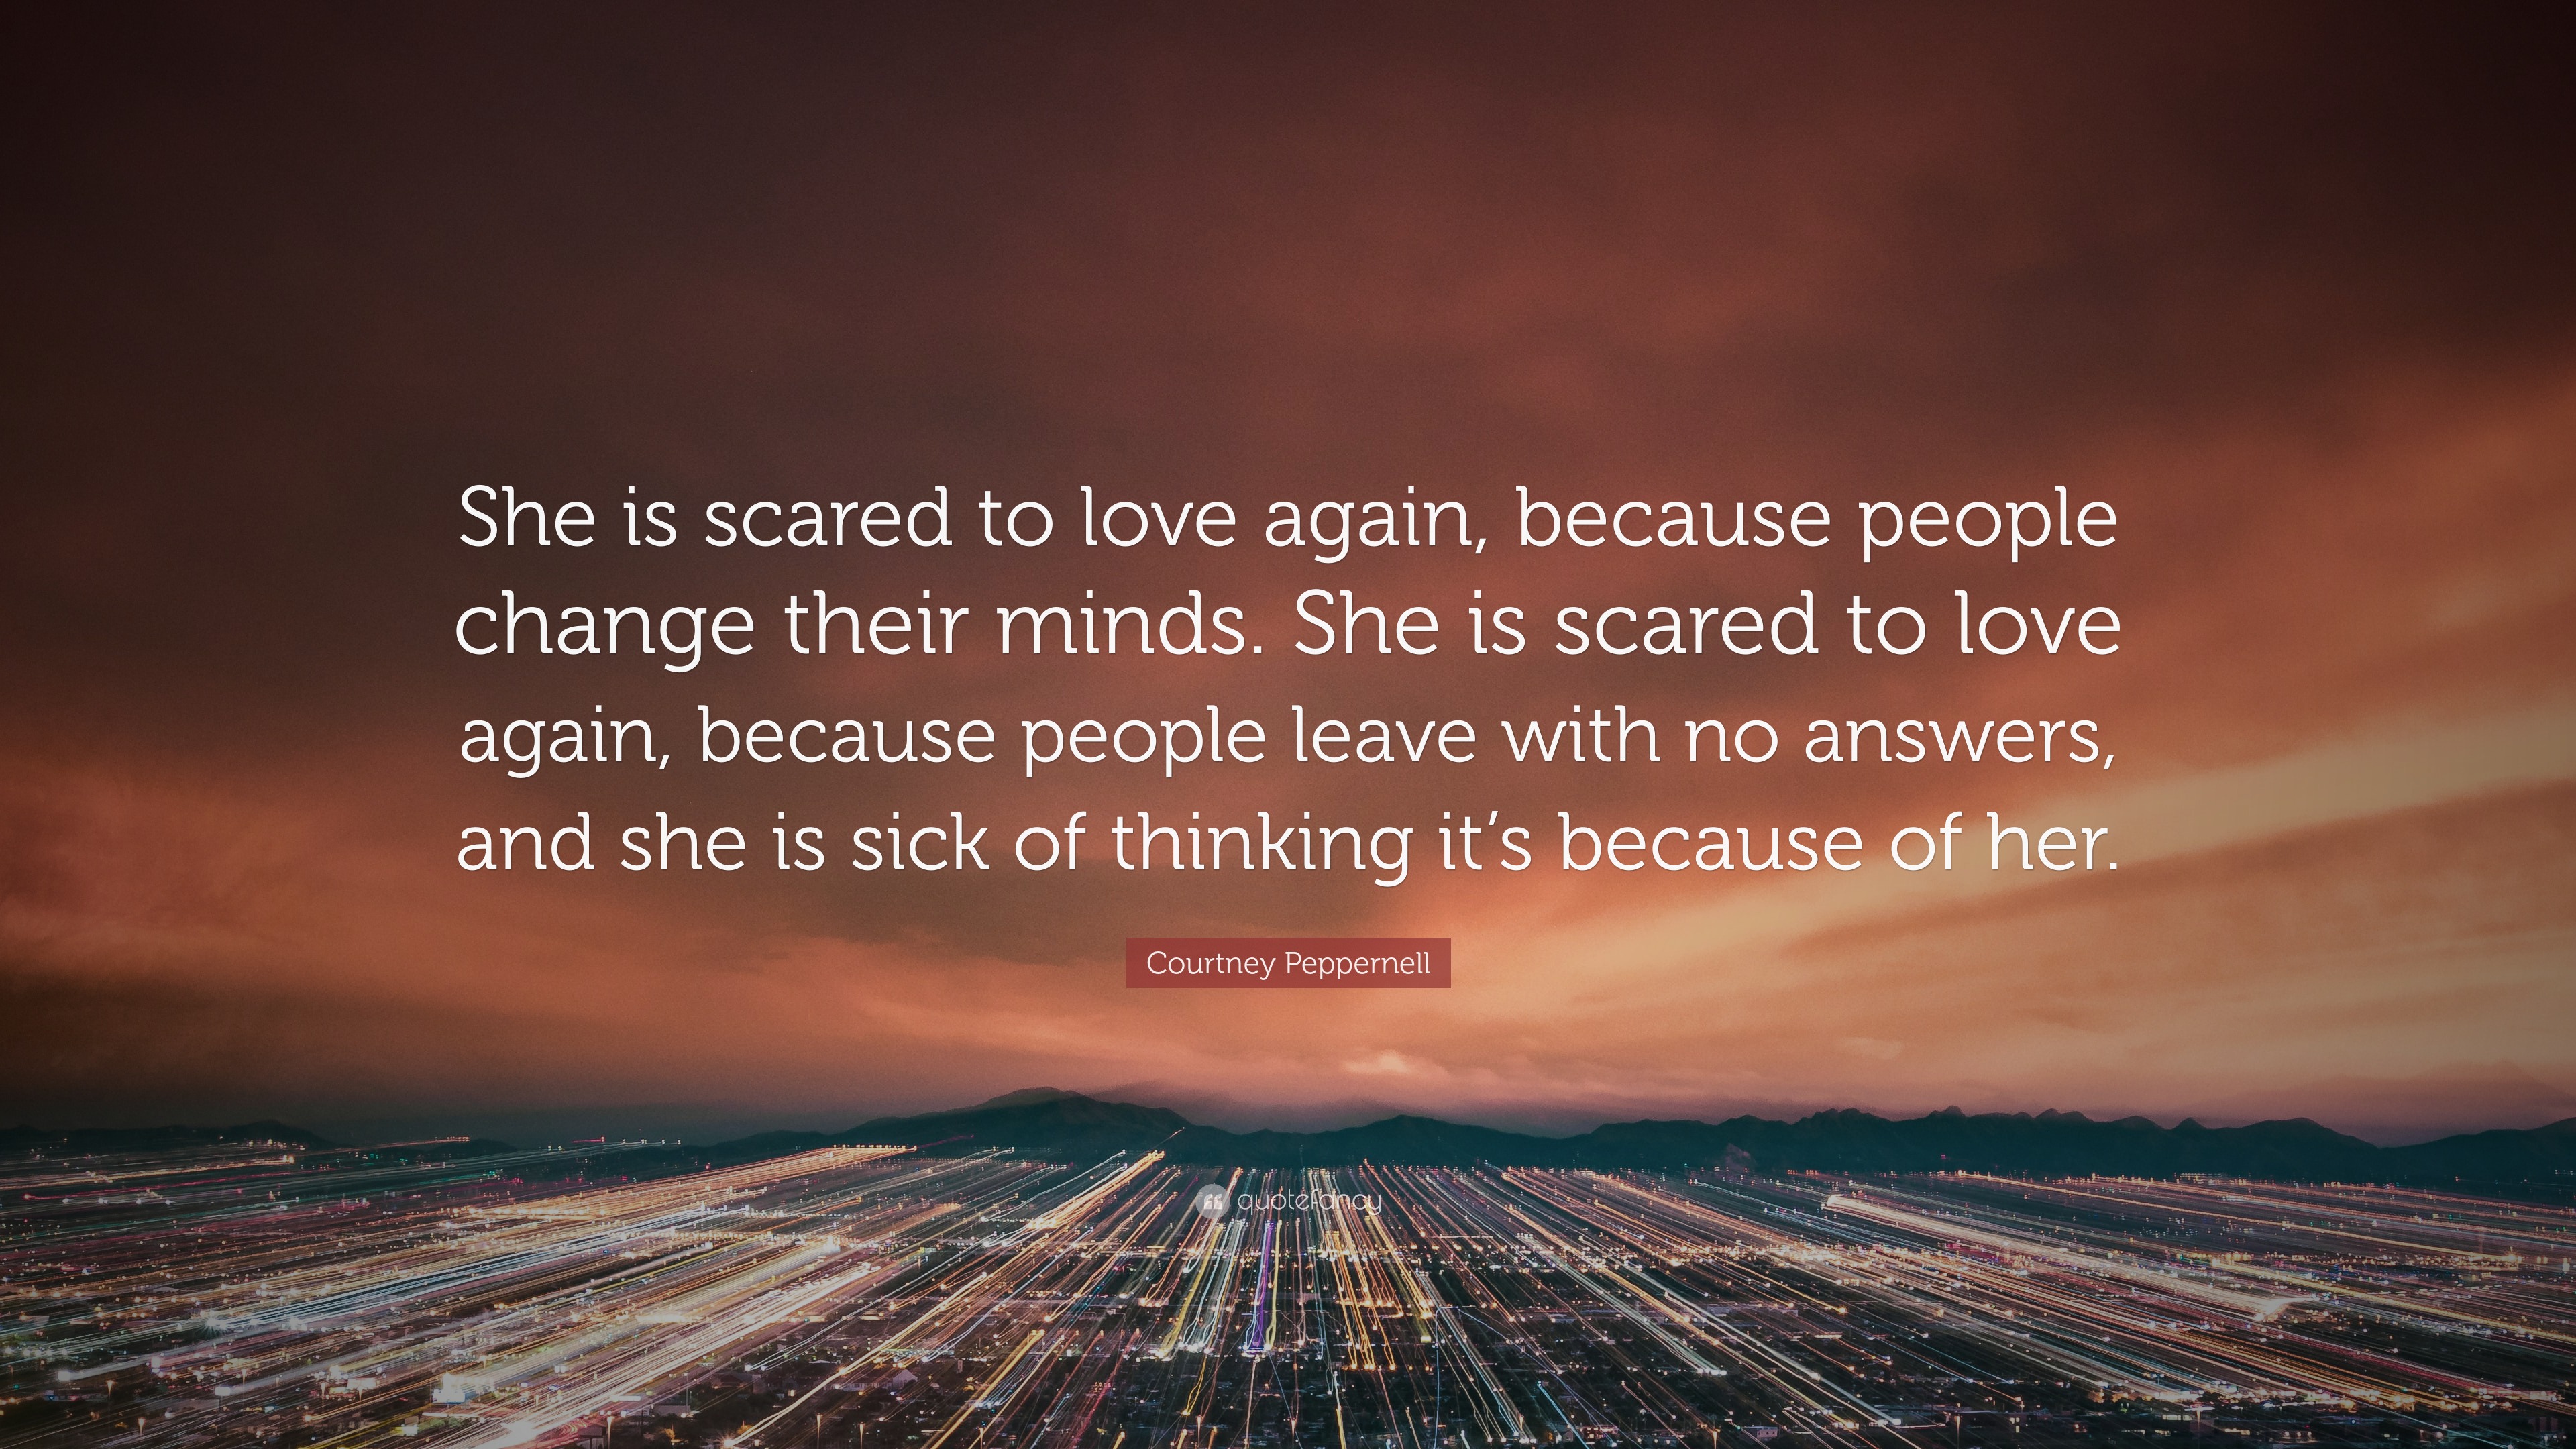 Courtney Peppernell Quote: “She is scared to love again, because people  change their minds. She is scared to love again, because people leave with  n”